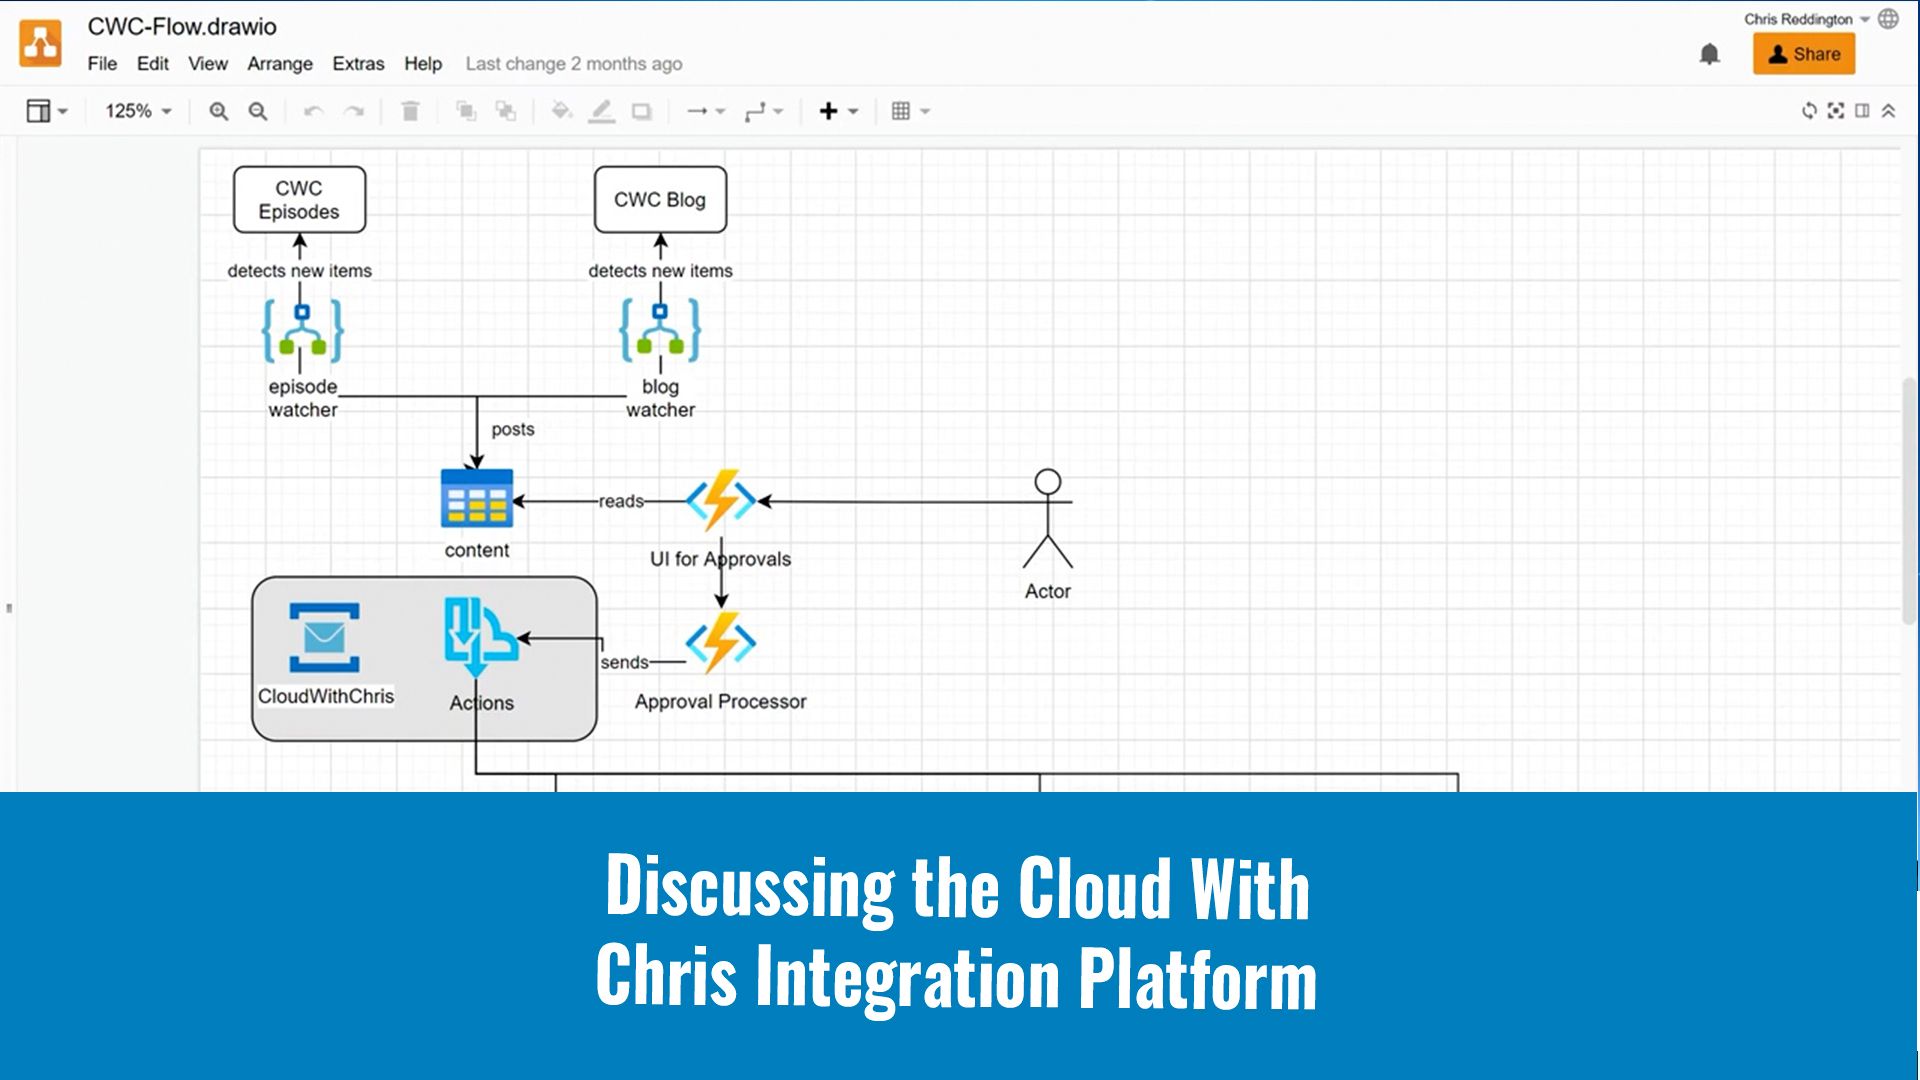 Discussing the Cloud with Chris Integration Platform